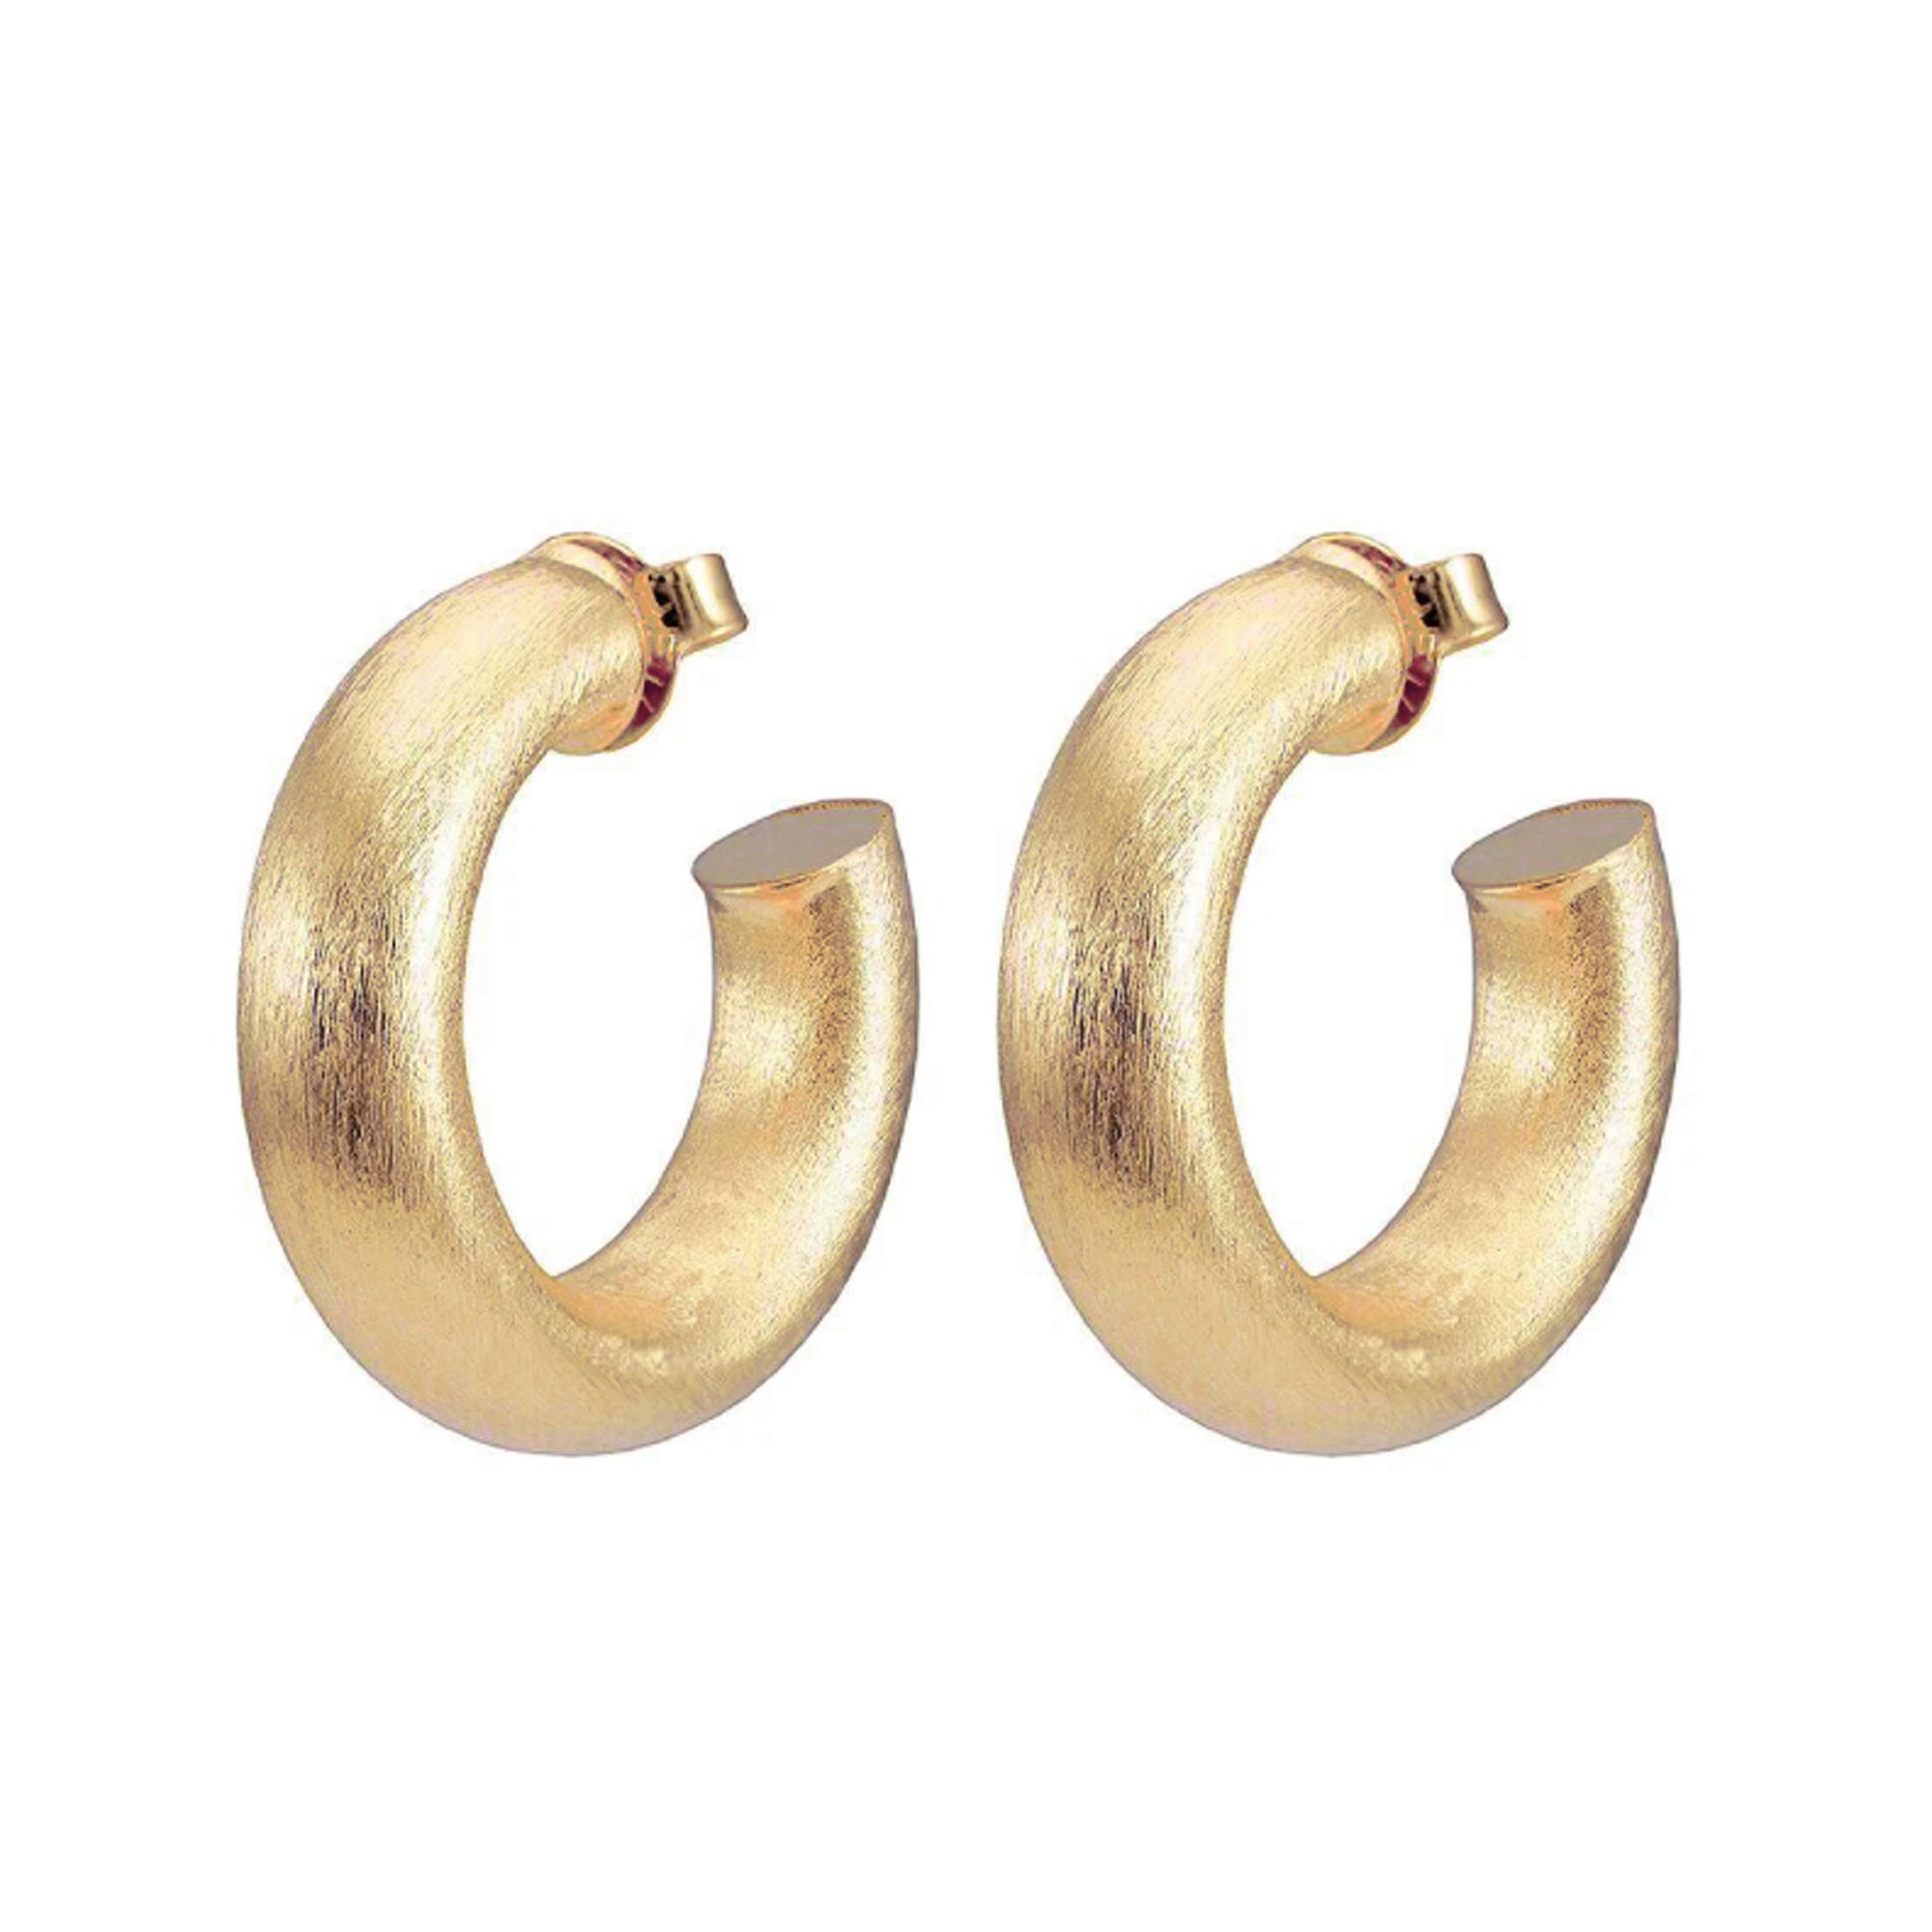 Sheila Fajl Thick Small Chantal Hoop Earrings in Brushed Champagne Plated